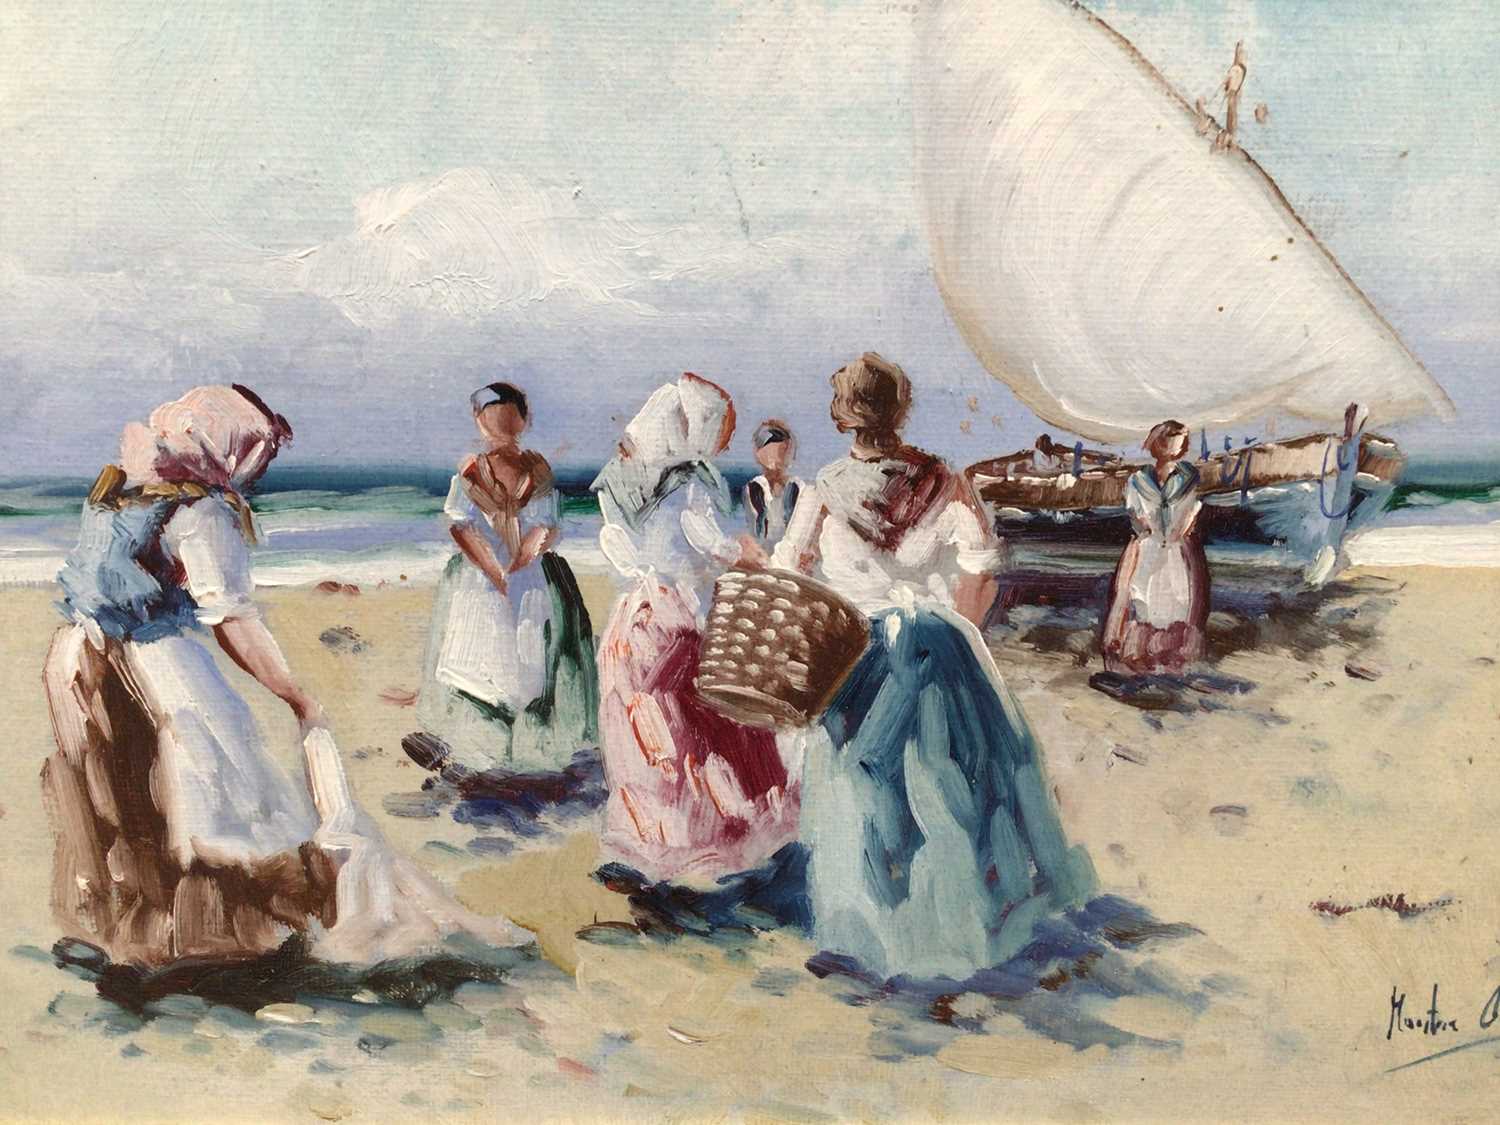 Lot 23 - French School, 20th century, oil on canvas - fisherfolk on the shore, indistinctly signed, 18cm x 32cm, in gilt frame